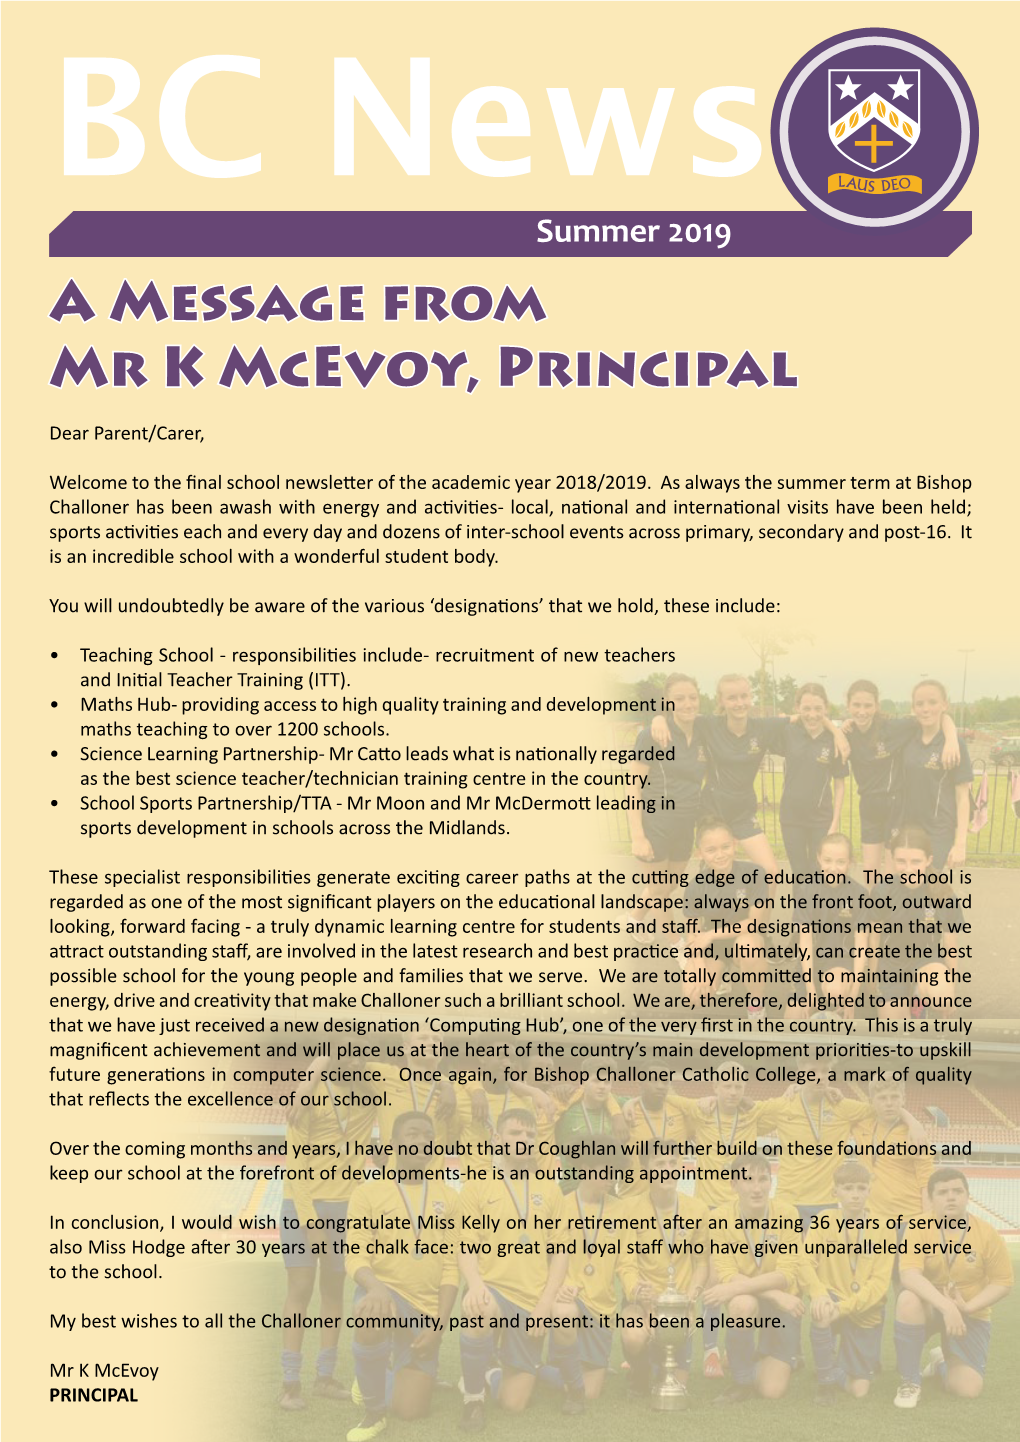 A Message from Mr K Mcevoy, Principal